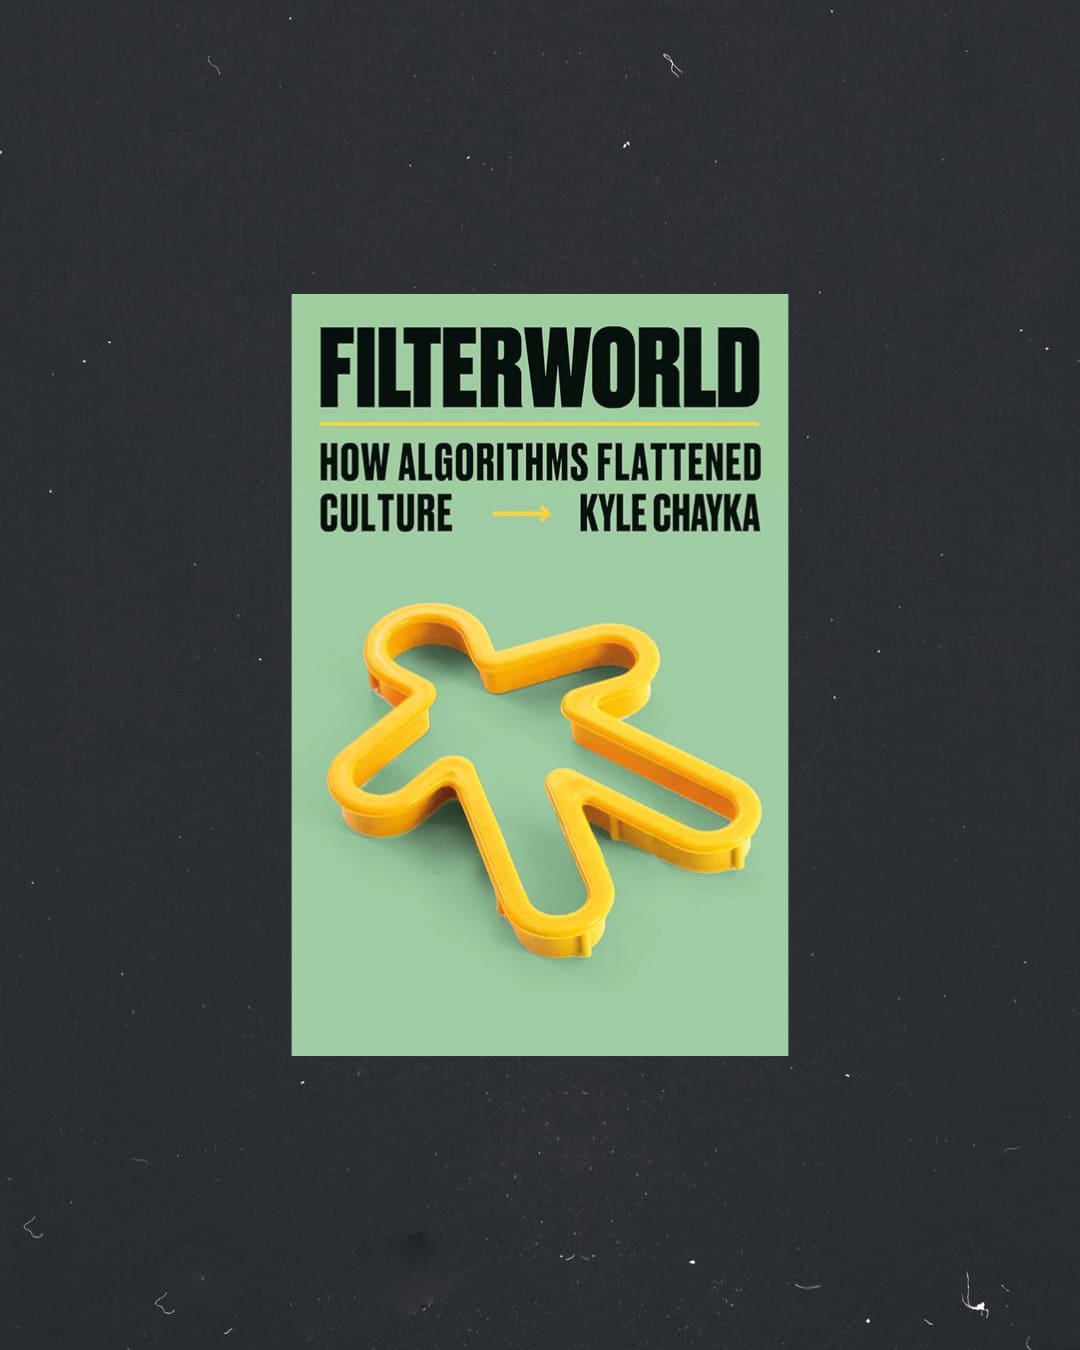 Filterworld: How Algorithms Flattened Culture by Kyle Chayka book cover